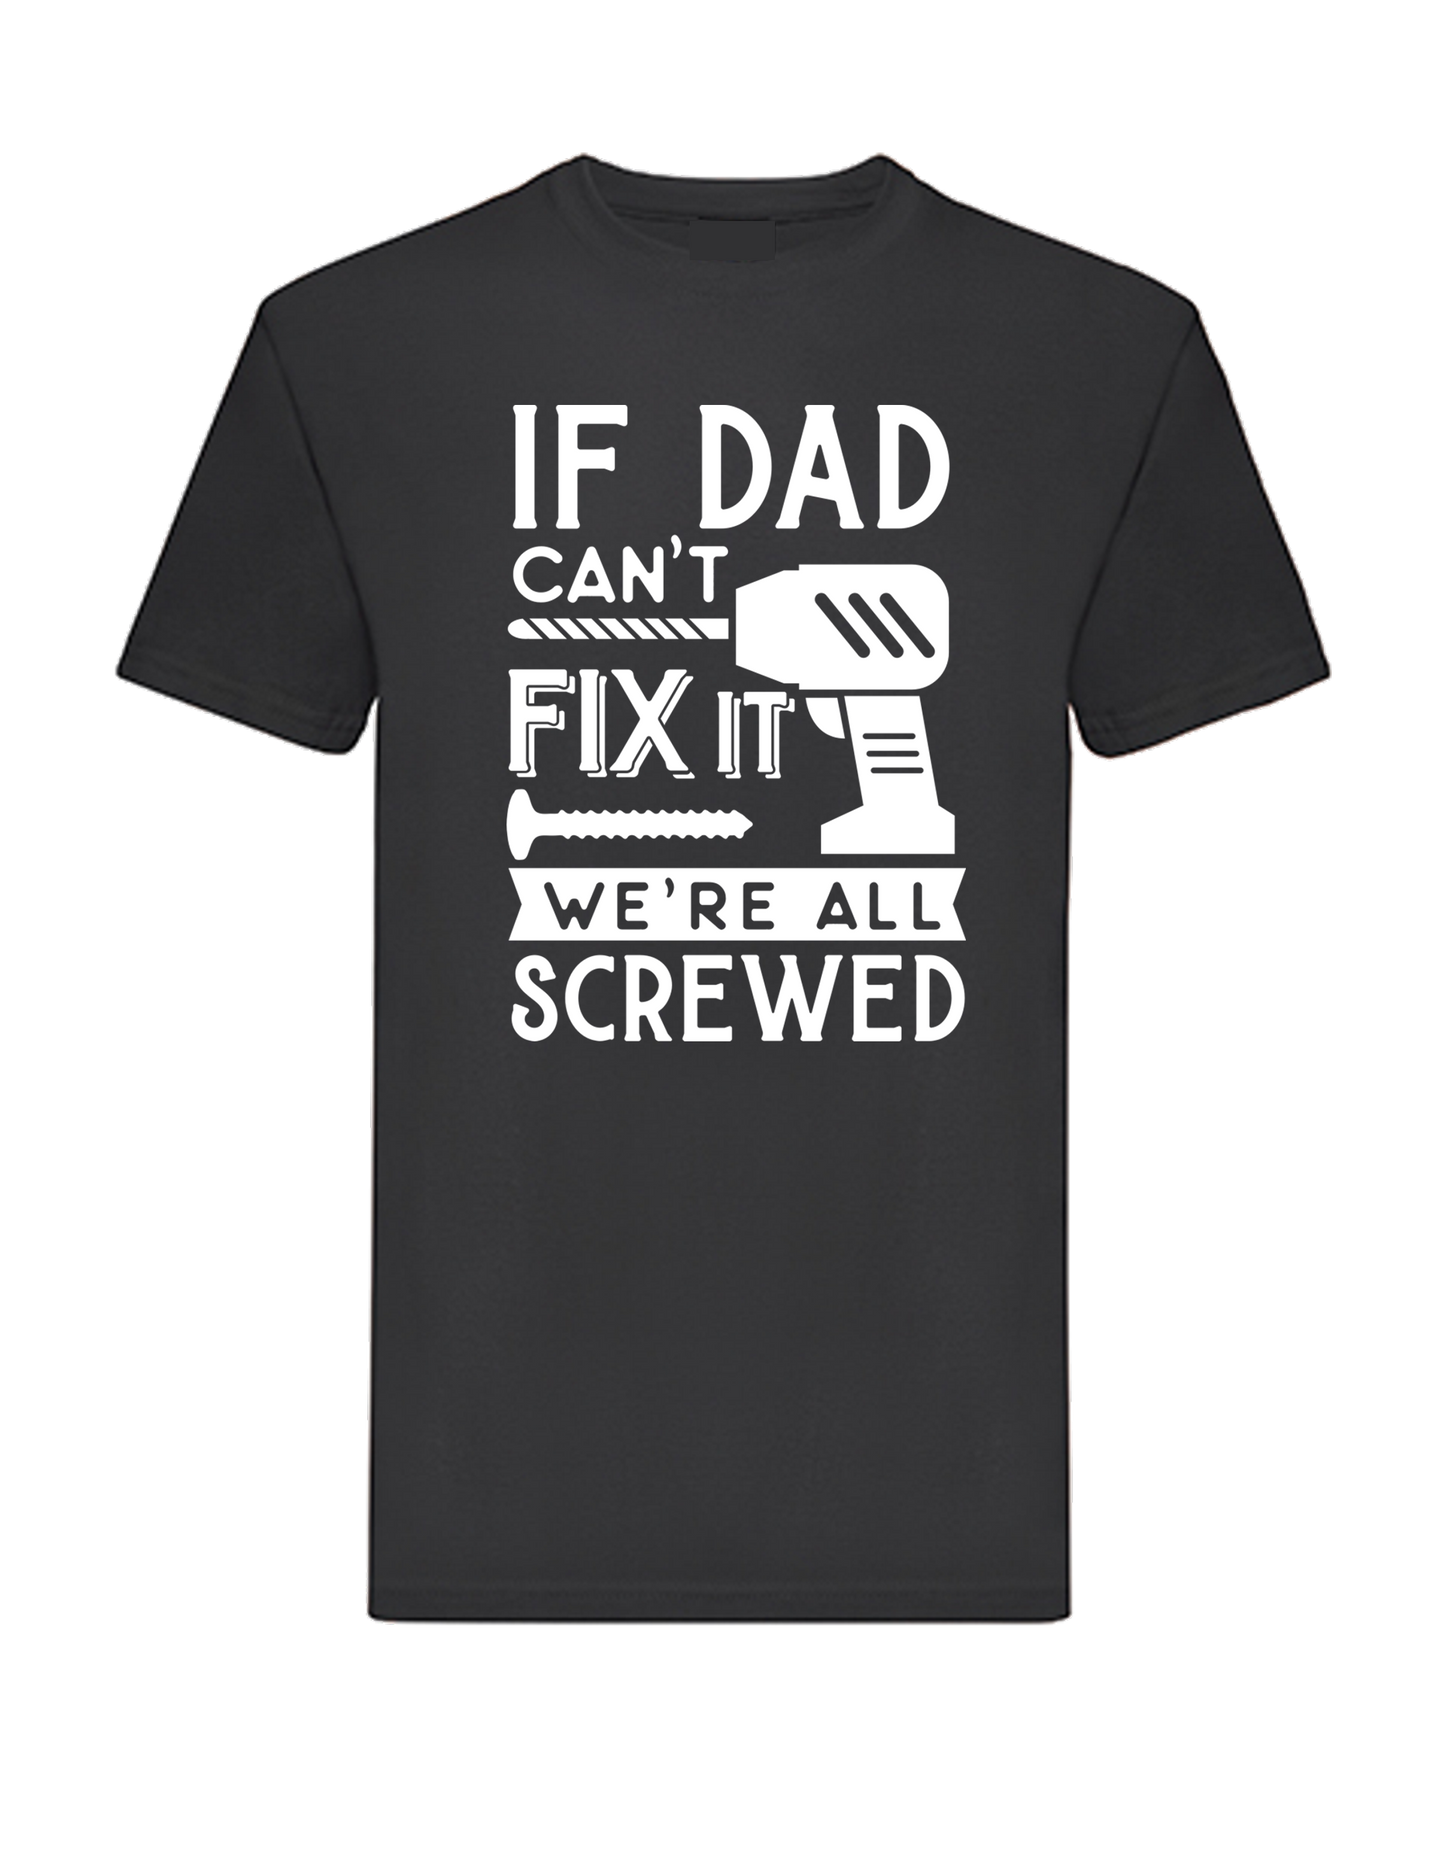 If dad can't fix it